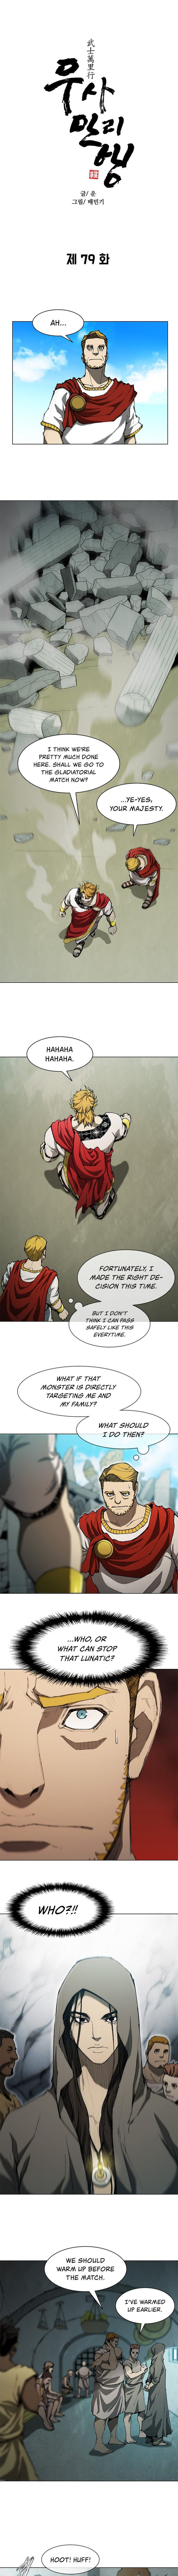 long-way-of-the-warrior-chap-79-1